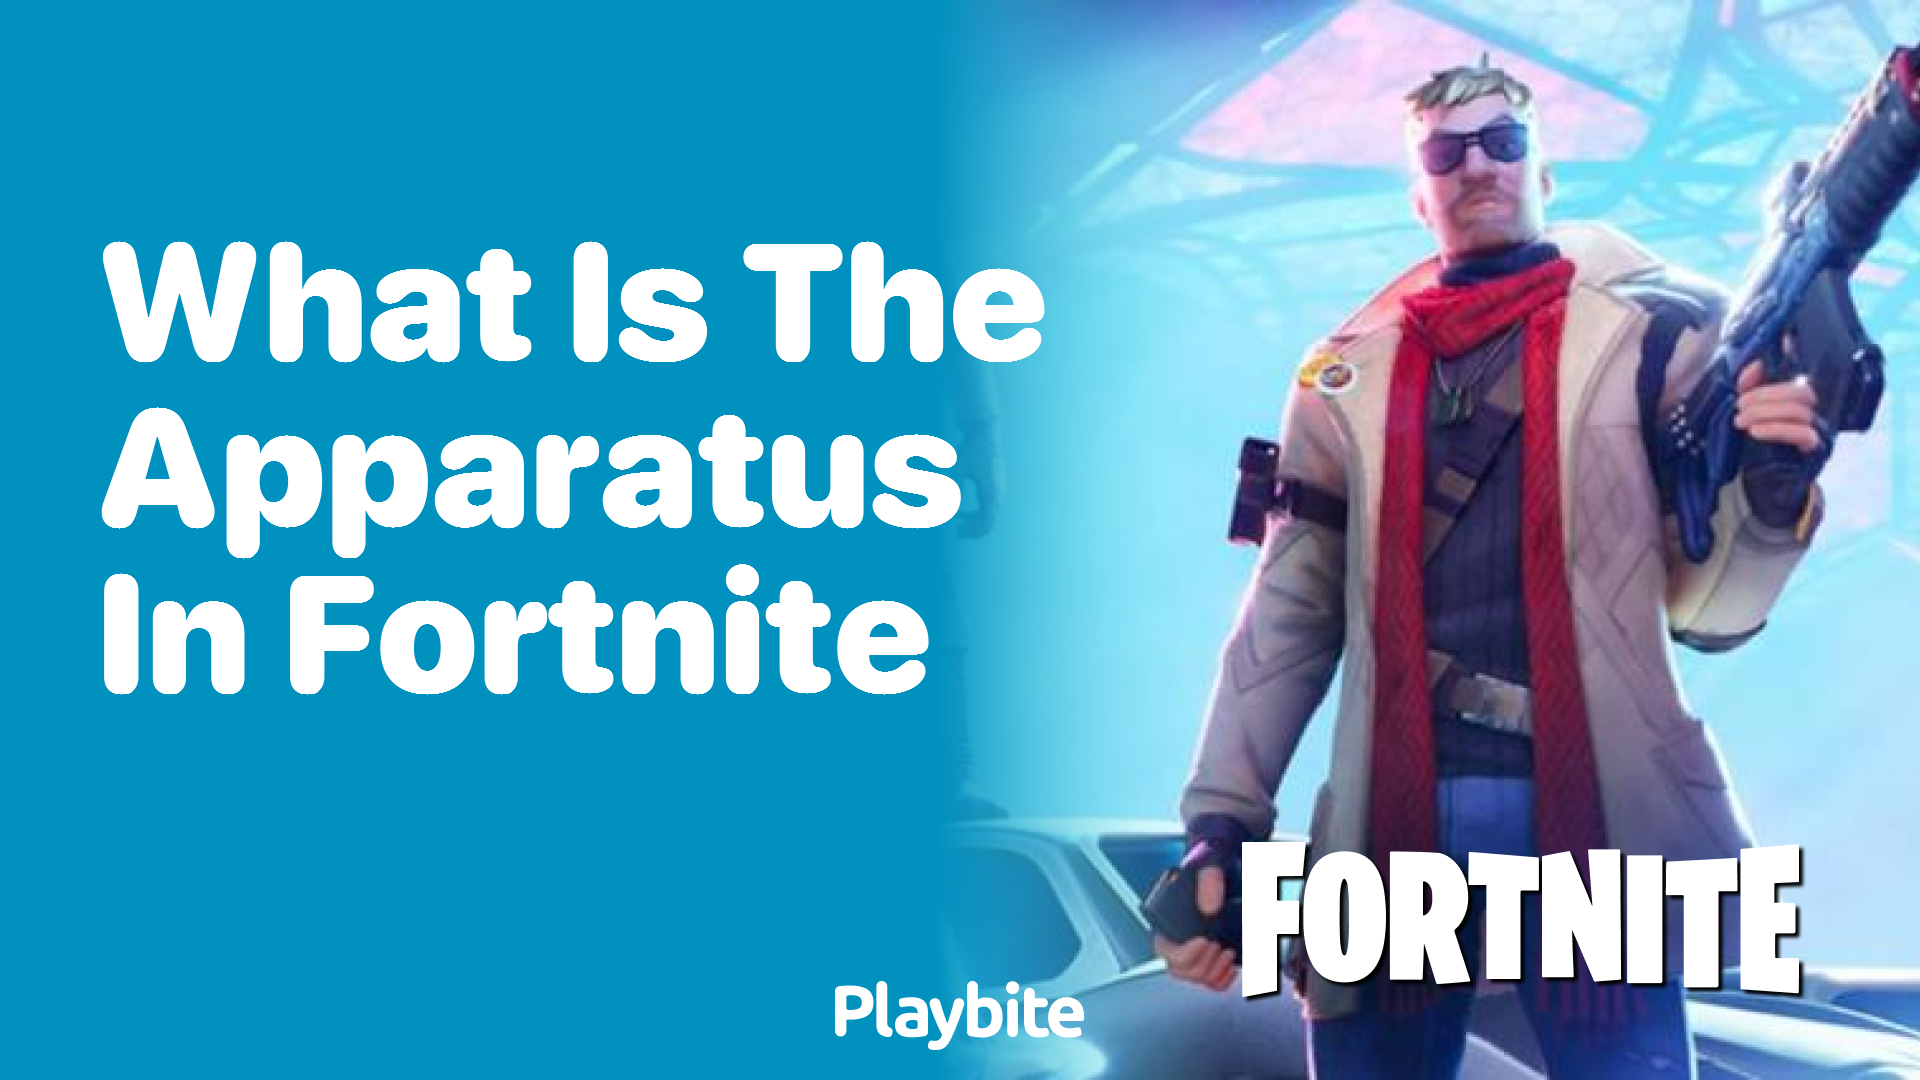 What is the Apparatus in Fortnite?